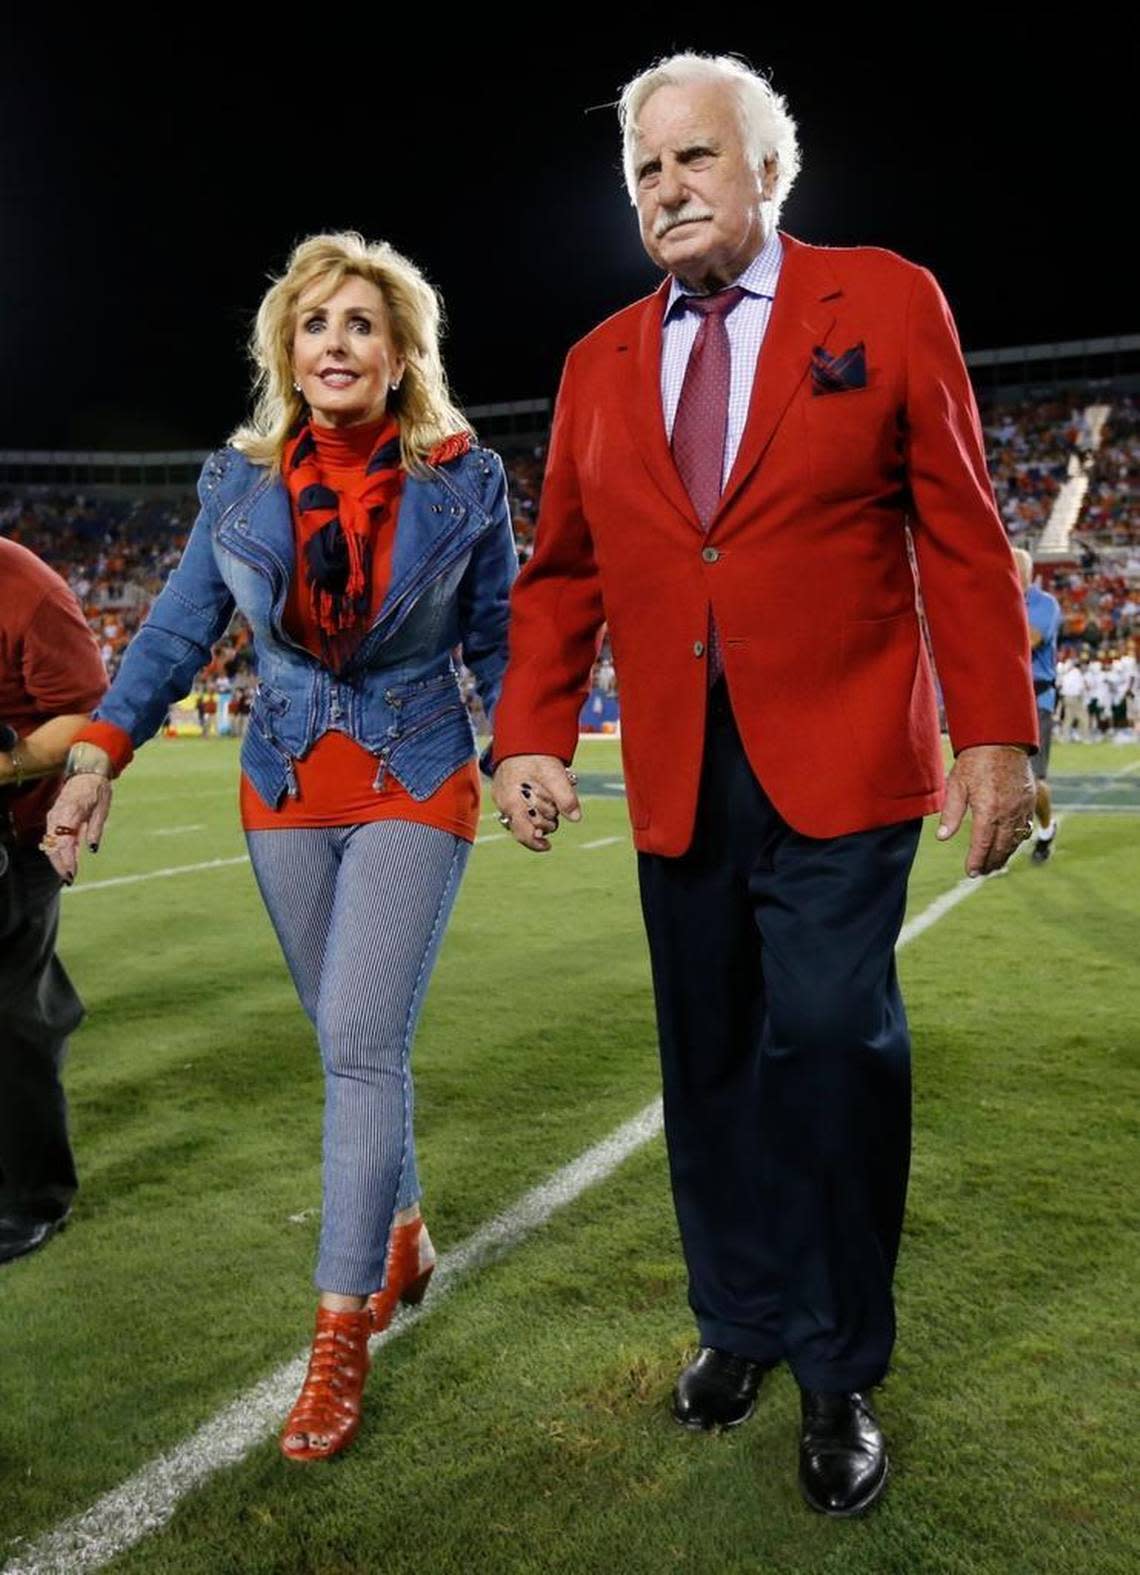 Howard Schnellenberger and wife Beverlee walk onto the field at FAU Stadium in Boca Raton on Friday, Sept. 11, 2015. The field at the stadium was named after Schnellenberger, who coached both the Miami Hurricanes and FAU Owls, who faced off Friday night.